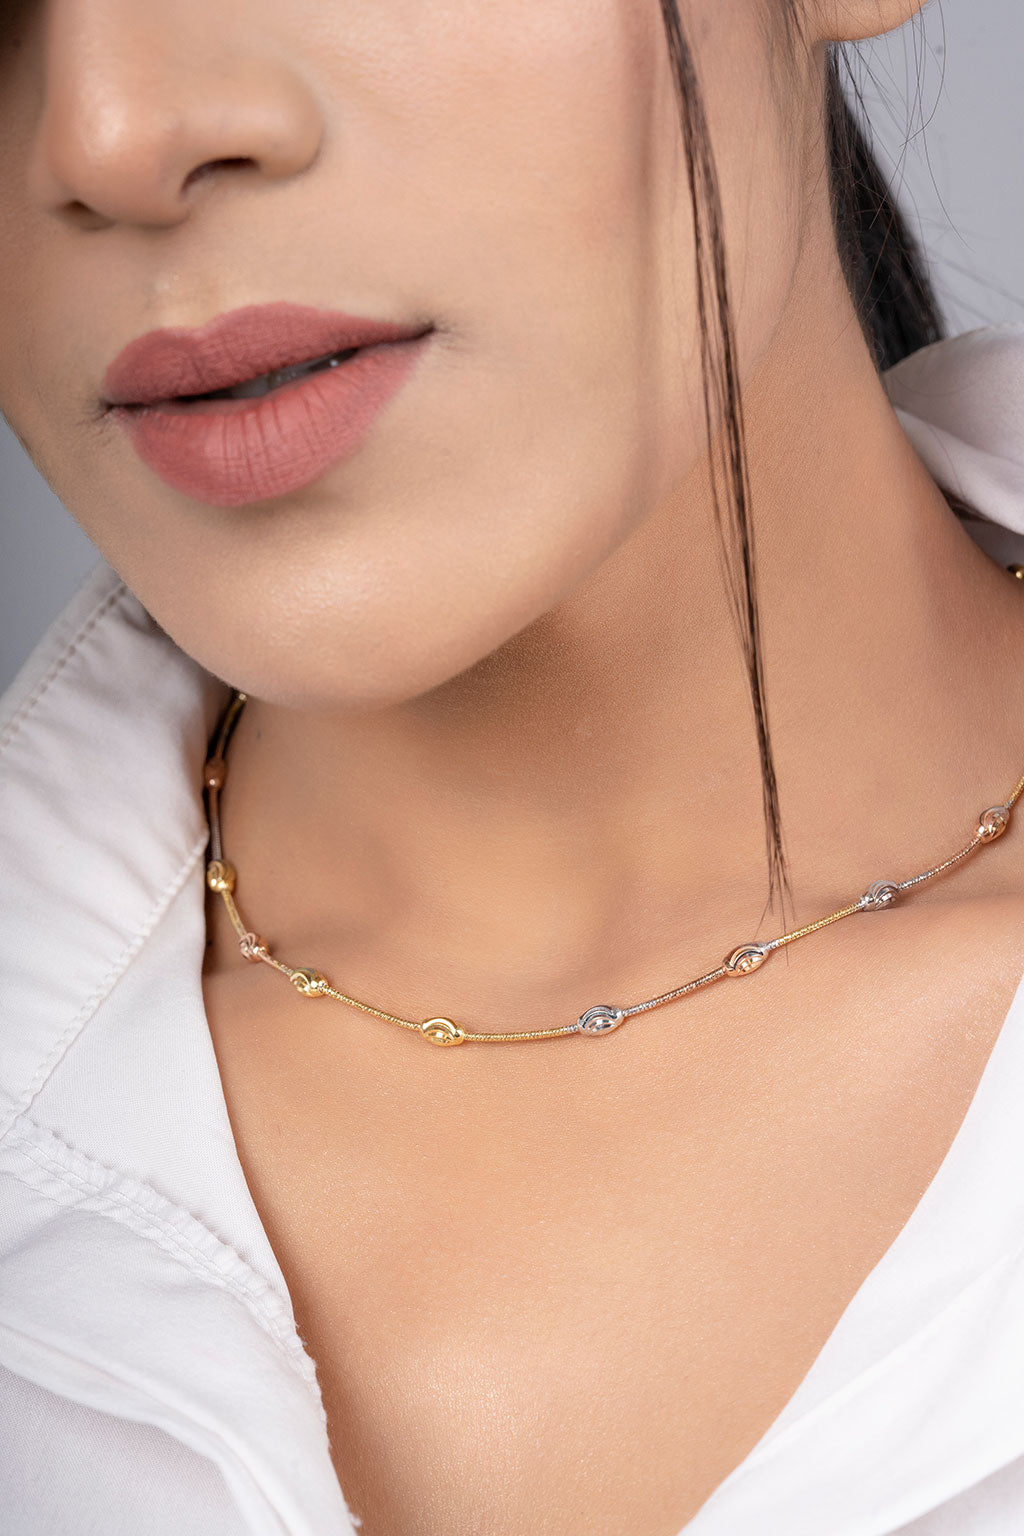 Finest Silver Chain For Women